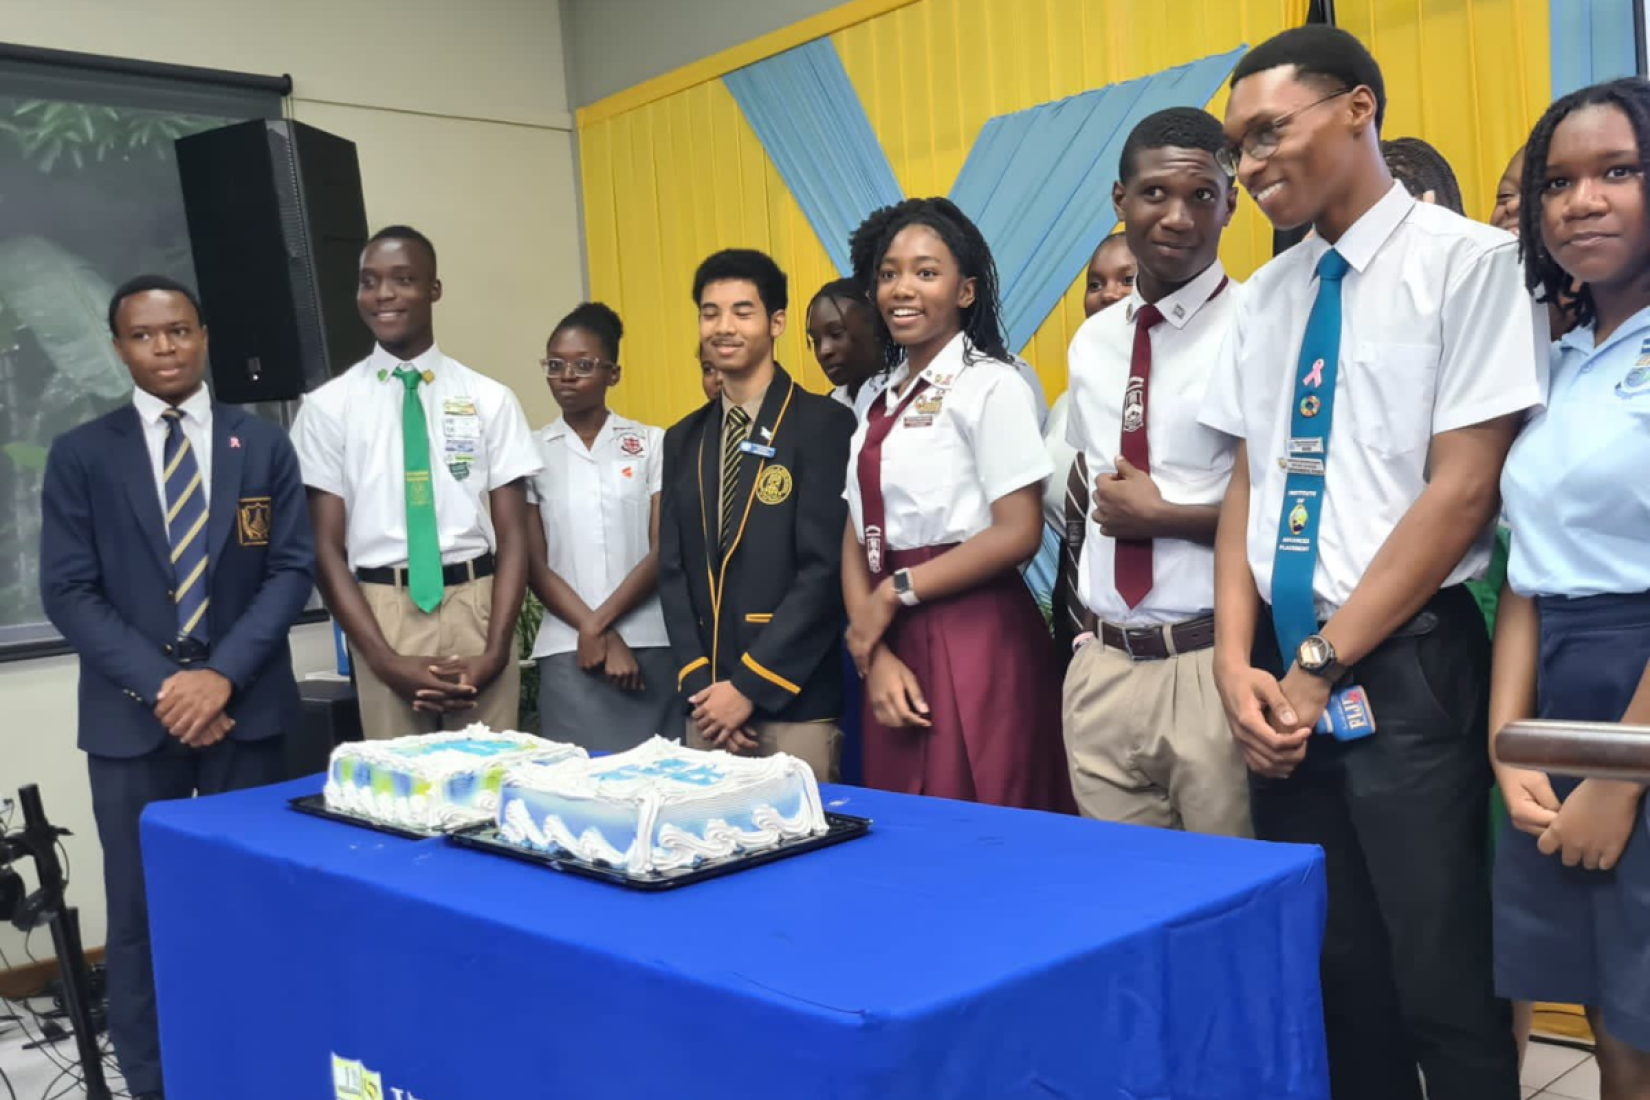 Young people gathered at Hillel Academy for a UN Day celebration featuring a special cake standing behind a table overlooking the cake